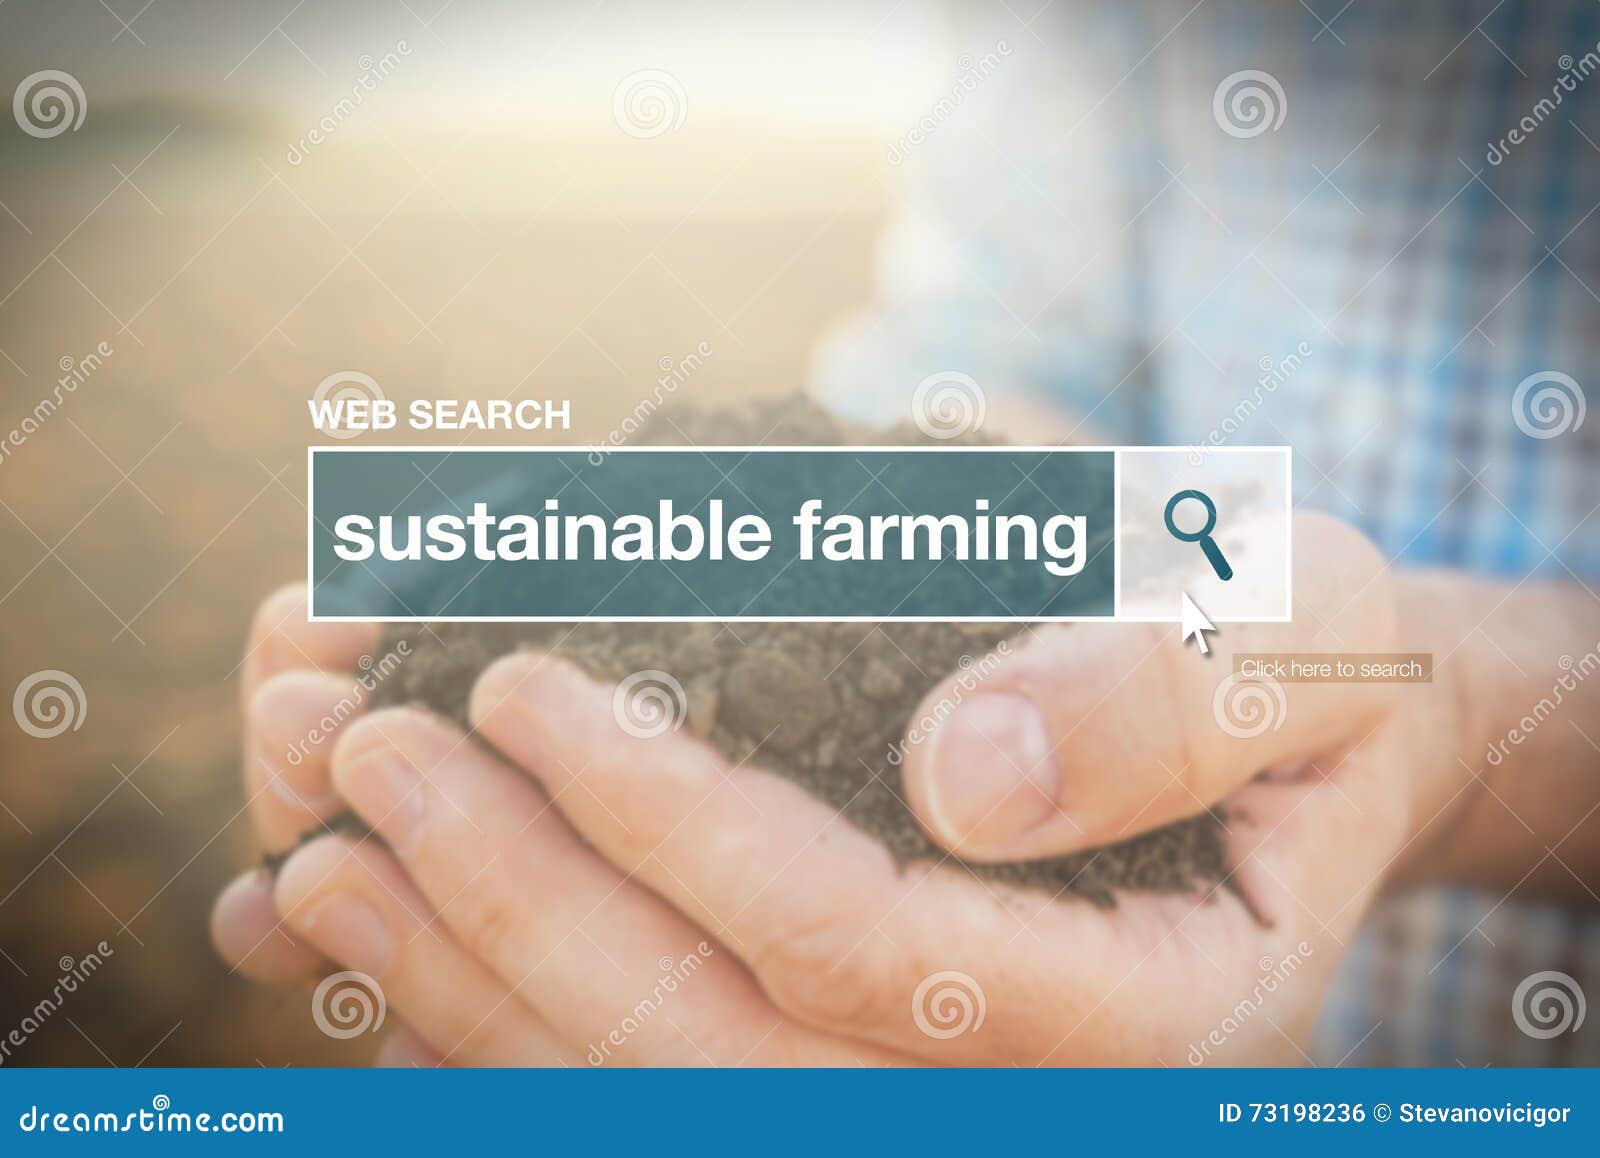 sustainable farming web search bar glossary term